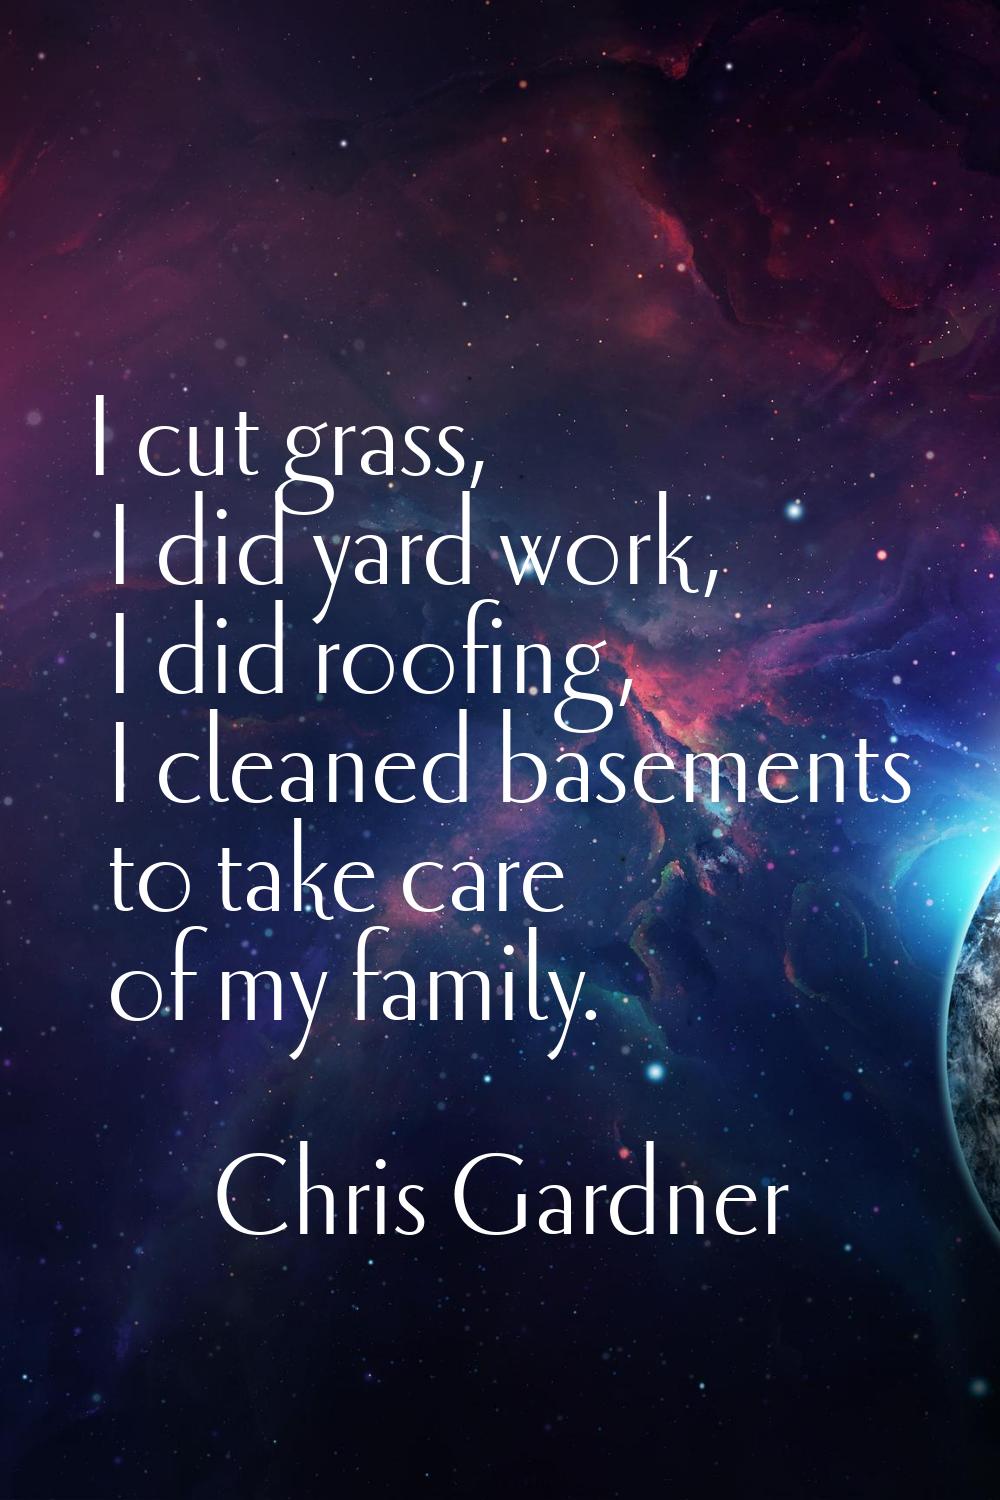 I cut grass, I did yard work, I did roofing, I cleaned basements to take care of my family.